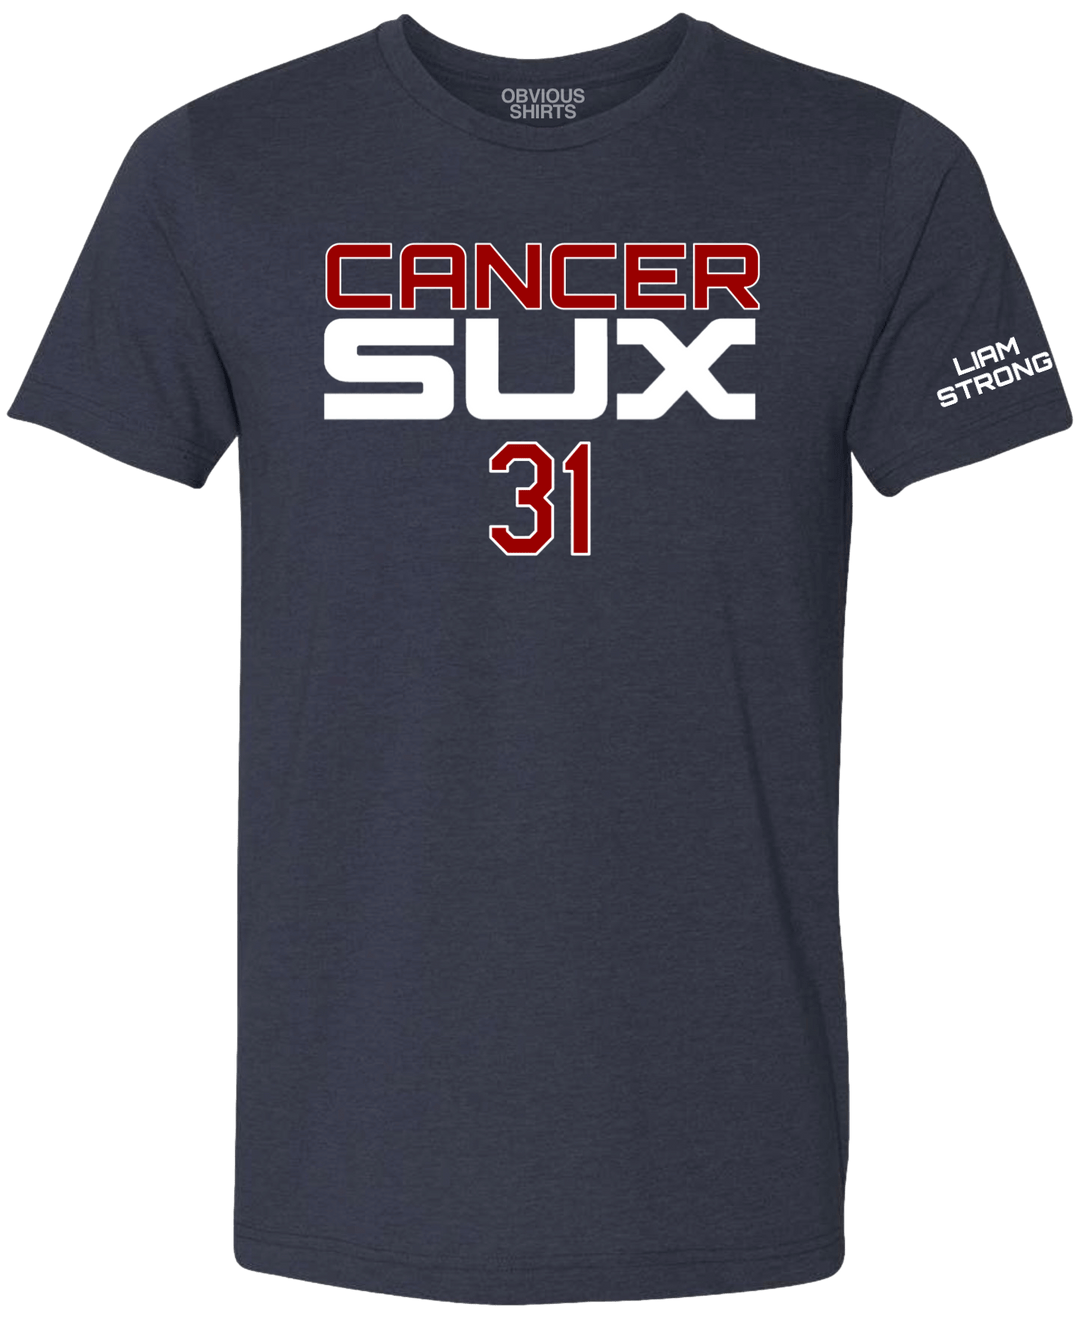 CANCER SUX. LIAM STRONG. (SOUTH SIDE RETRO) - OBVIOUS SHIRTS